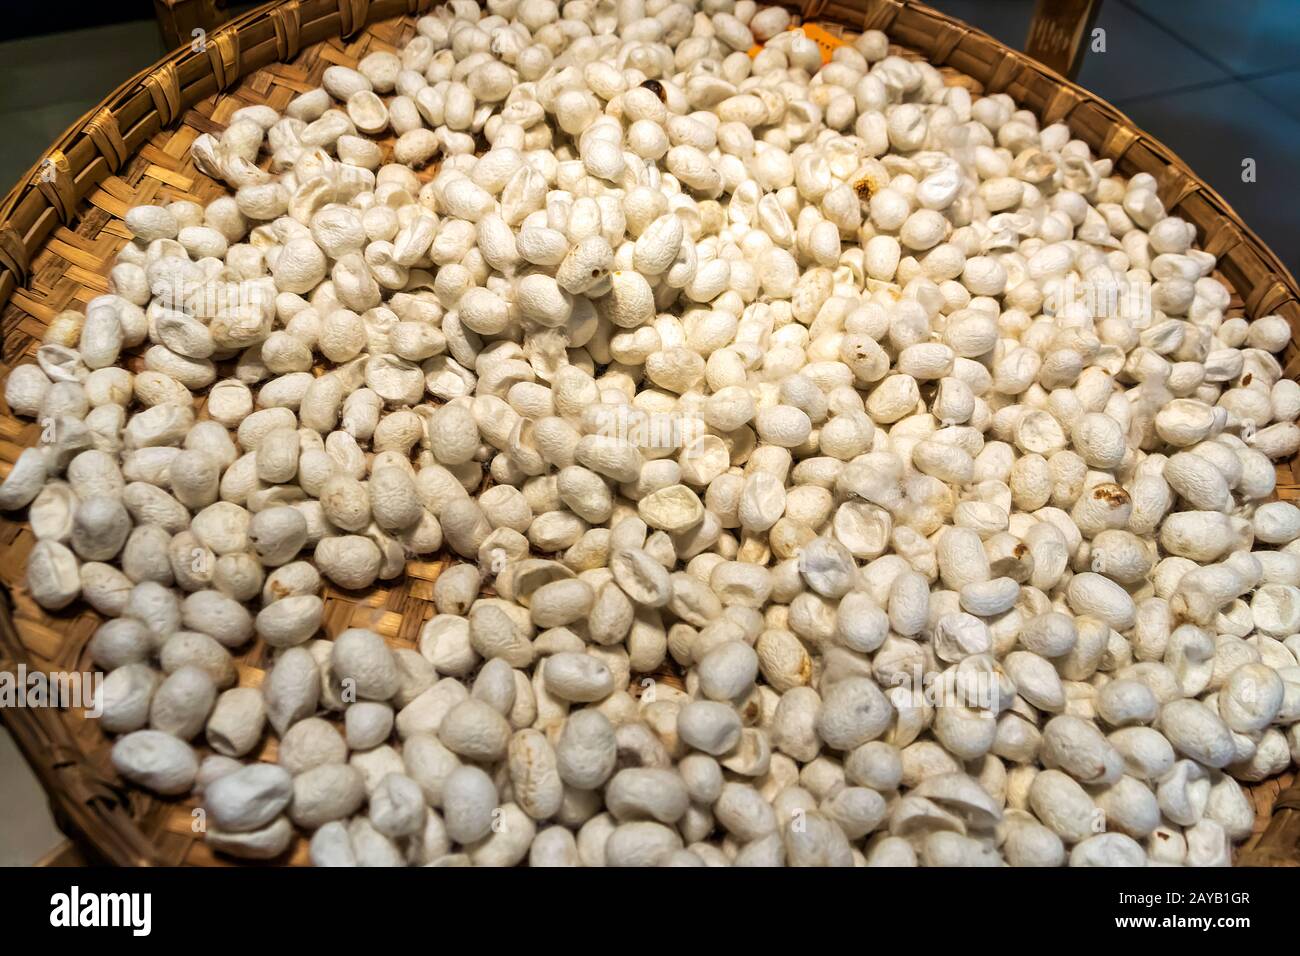 Large number of silk cocoons from silk worms on bamboo tray Stock Photo